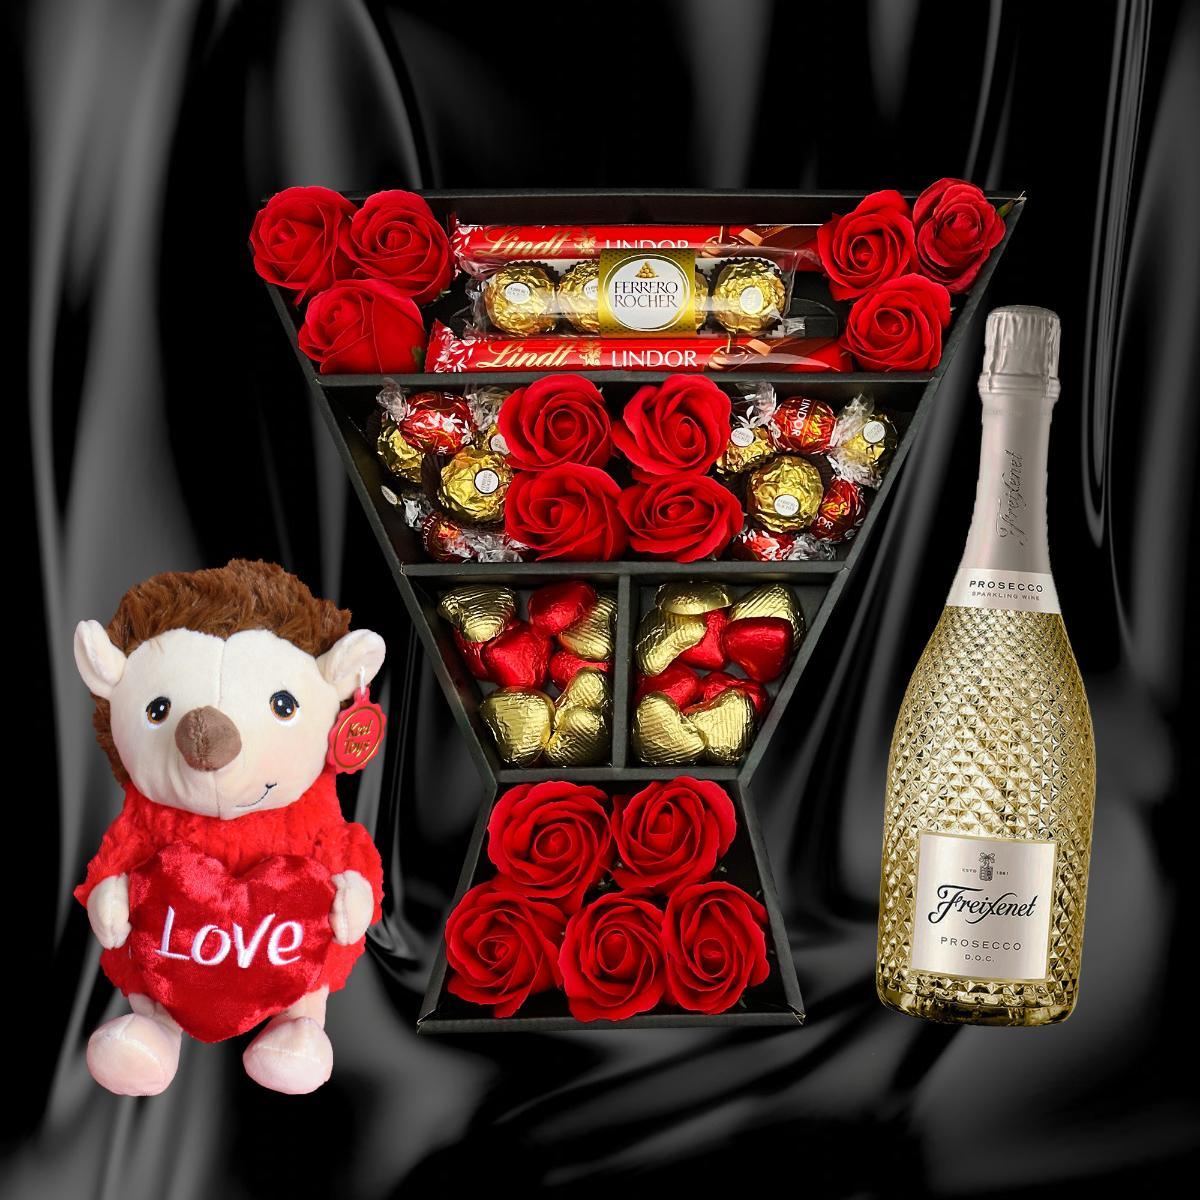 Lindt Lindor & Ferrero Rocher Signature Chocolate Bouquet With Red Roses - iSAW Company